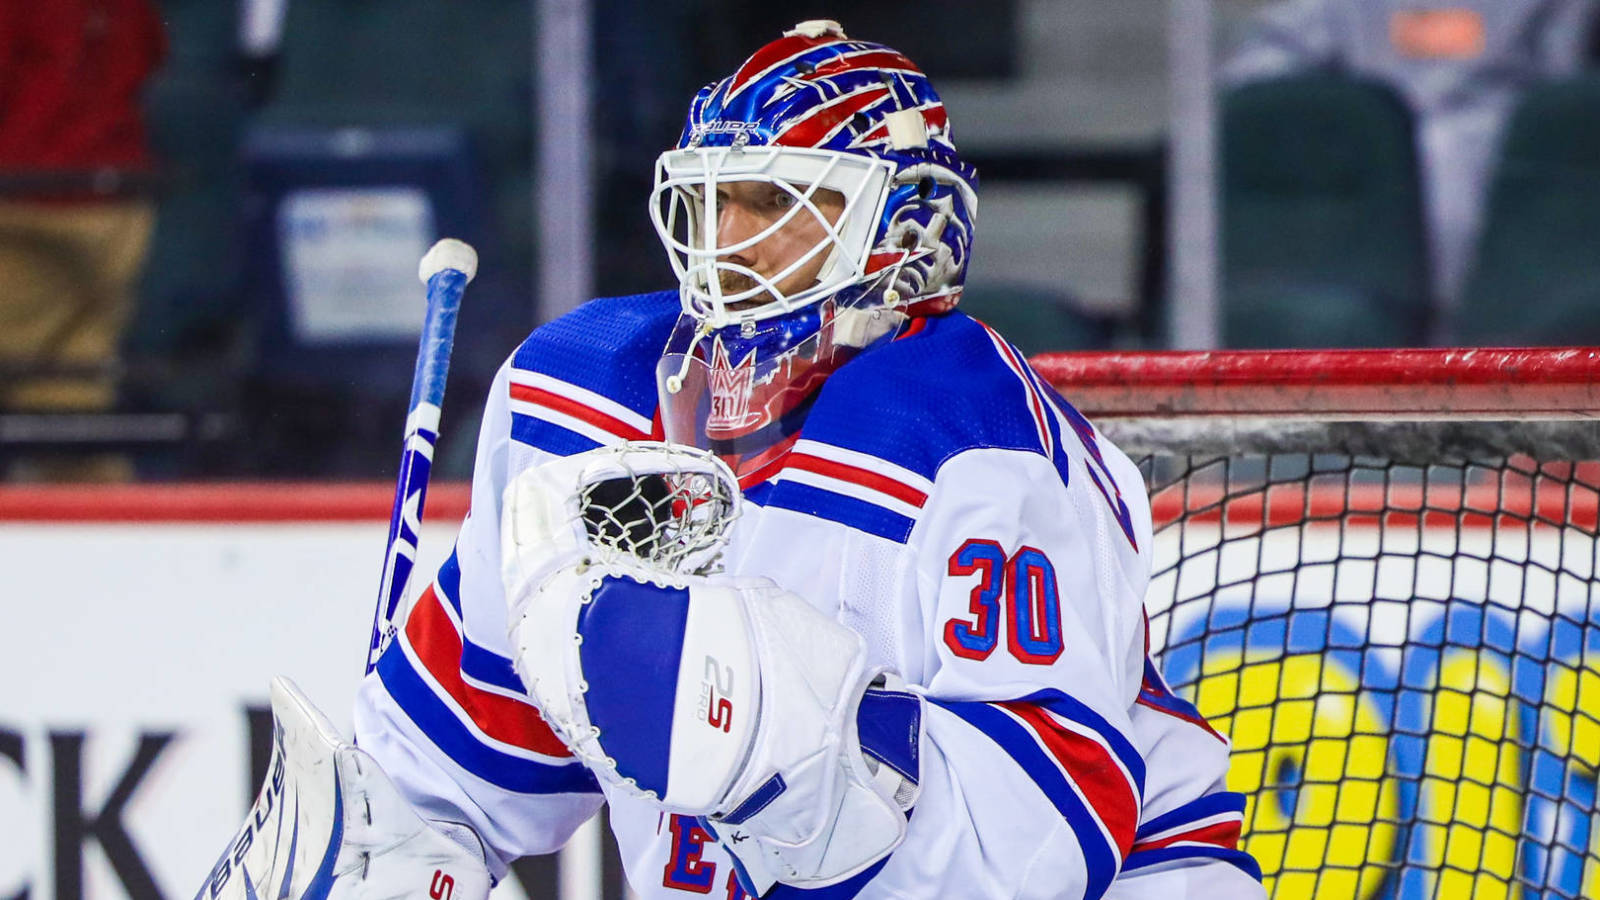 Report: Rangers 'likely' to buy out netminder Lundqvist | Yardbarker